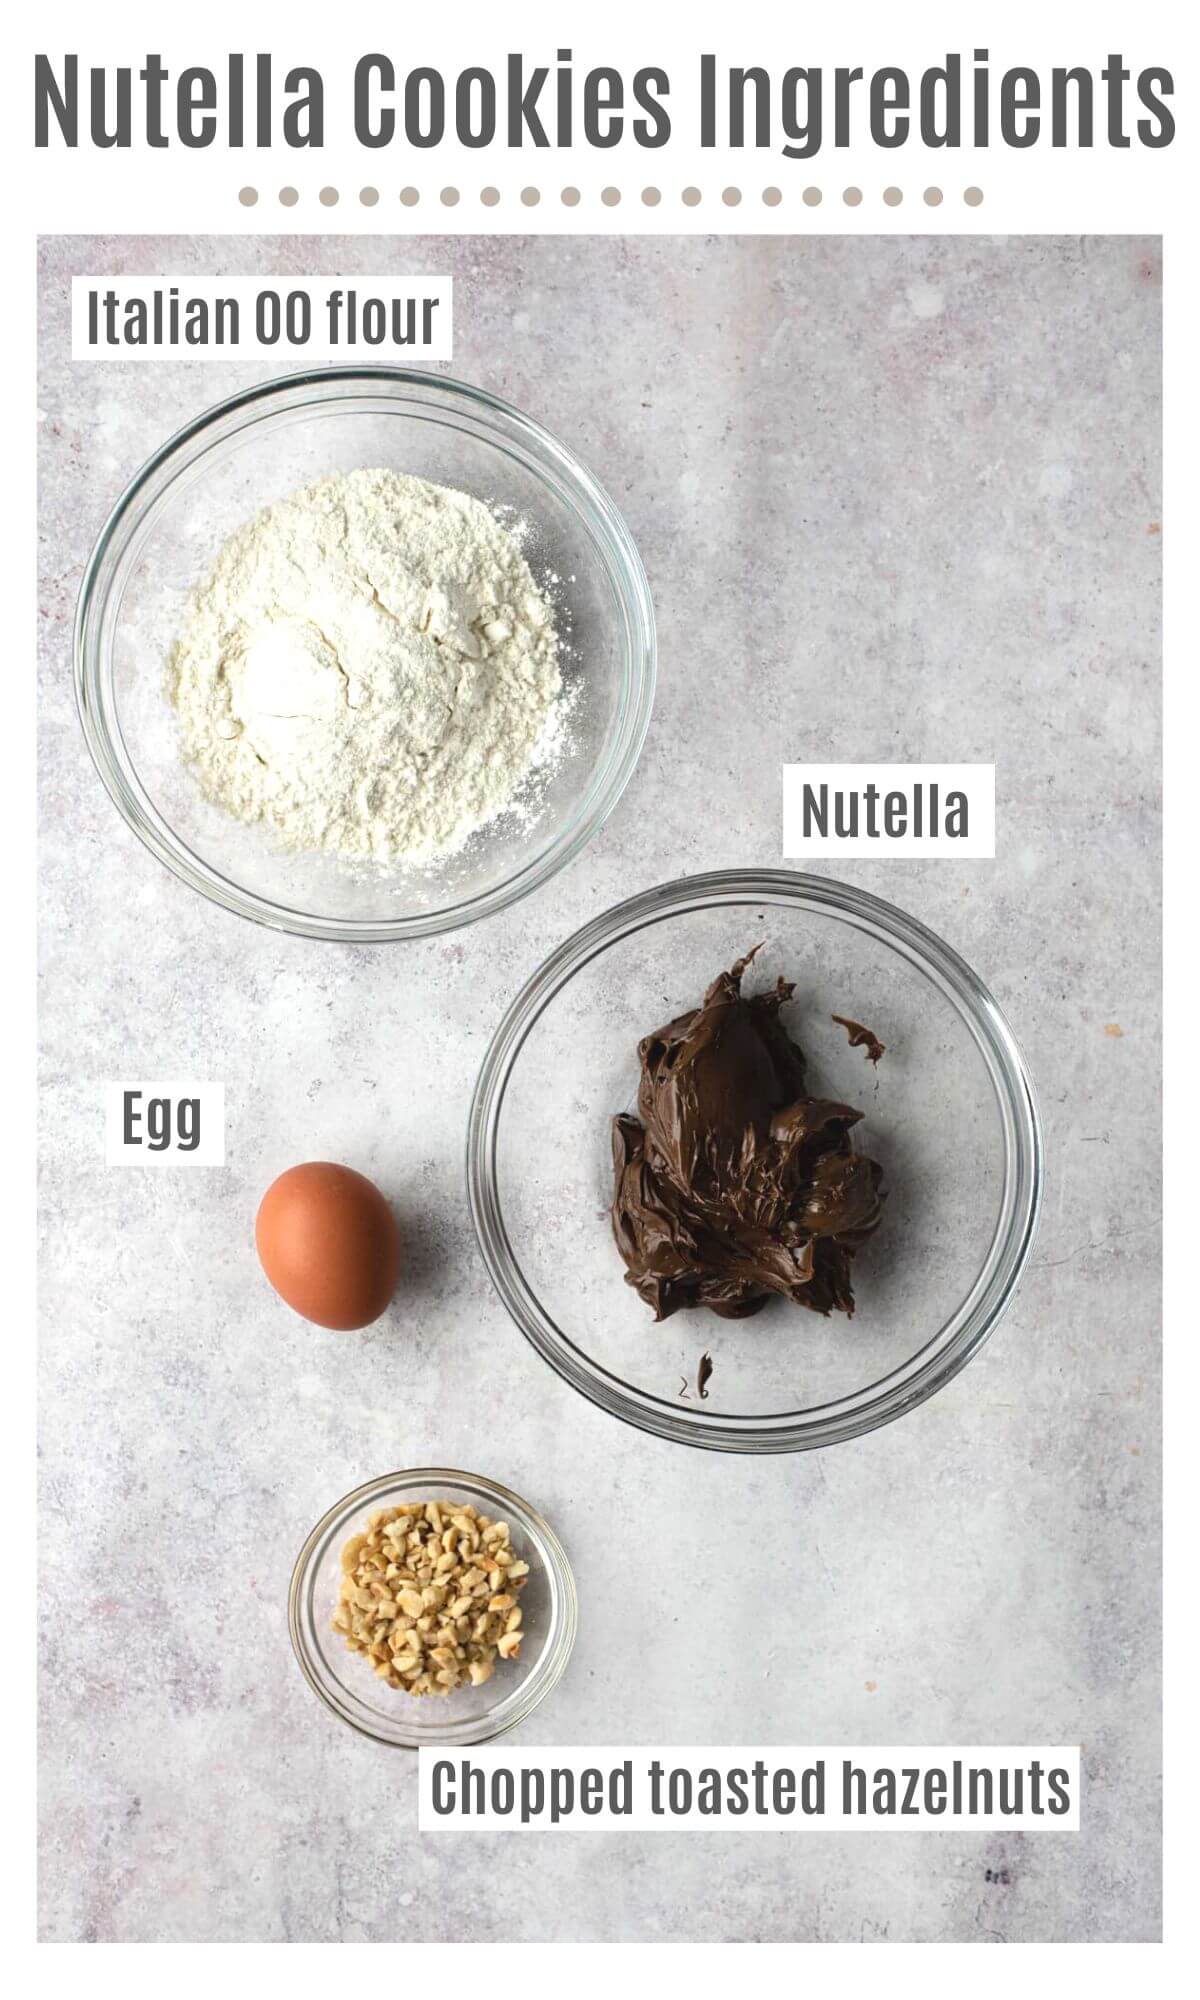 An overhead shot of all the ingredients you need to make Nutella cookies; flour, Nutella, egg and chopped toasted hazelnuts.